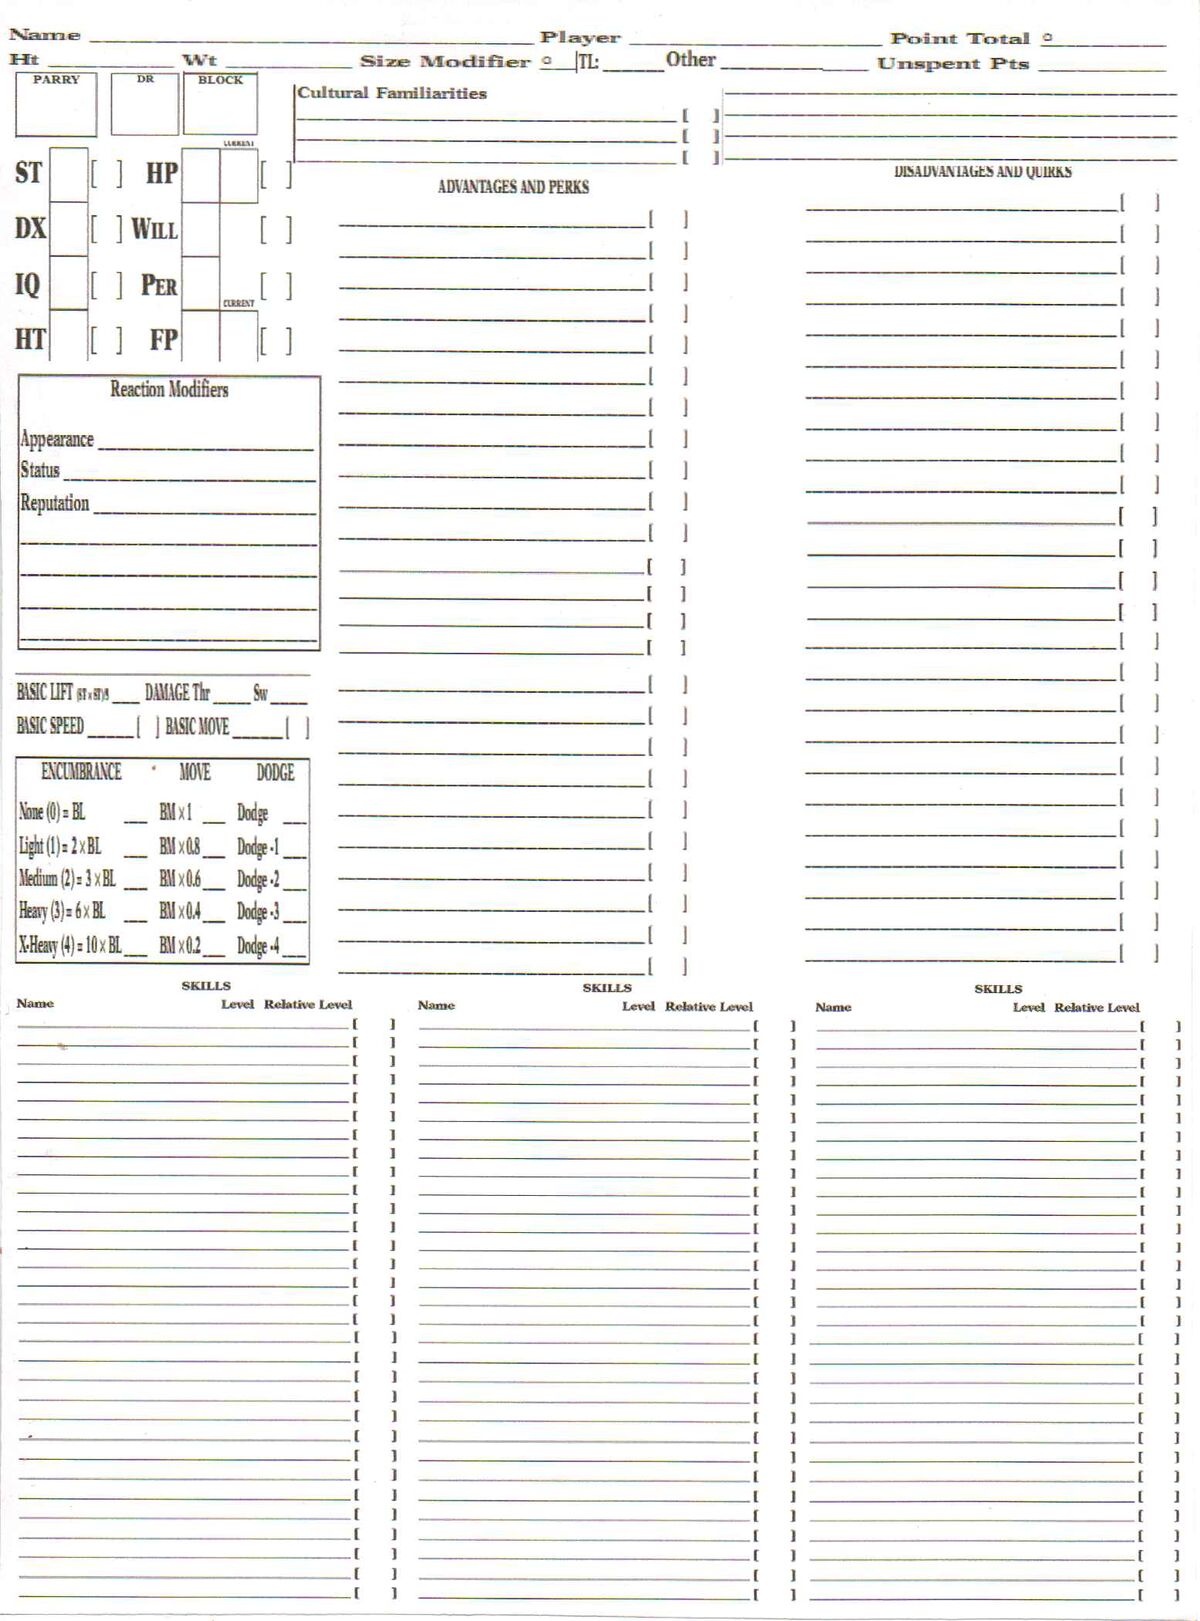 Character Sheets List | The Lost Boys of GURPS Wiki | Fandom